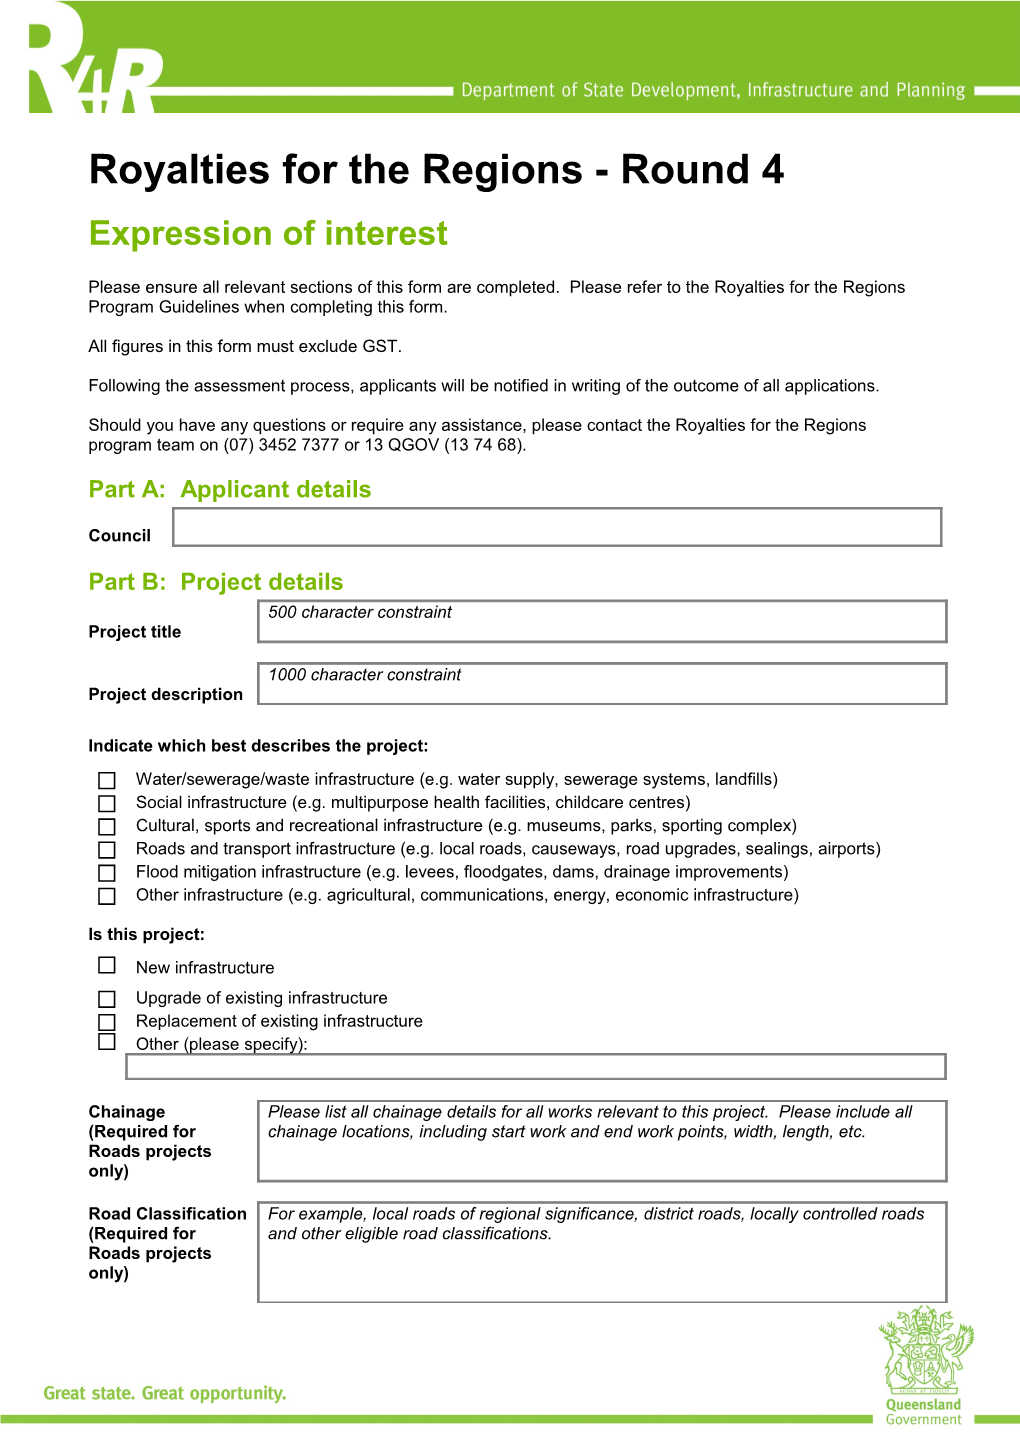 Royalties for the Regions - Round 4: Expressions of Interest Manual Application Form